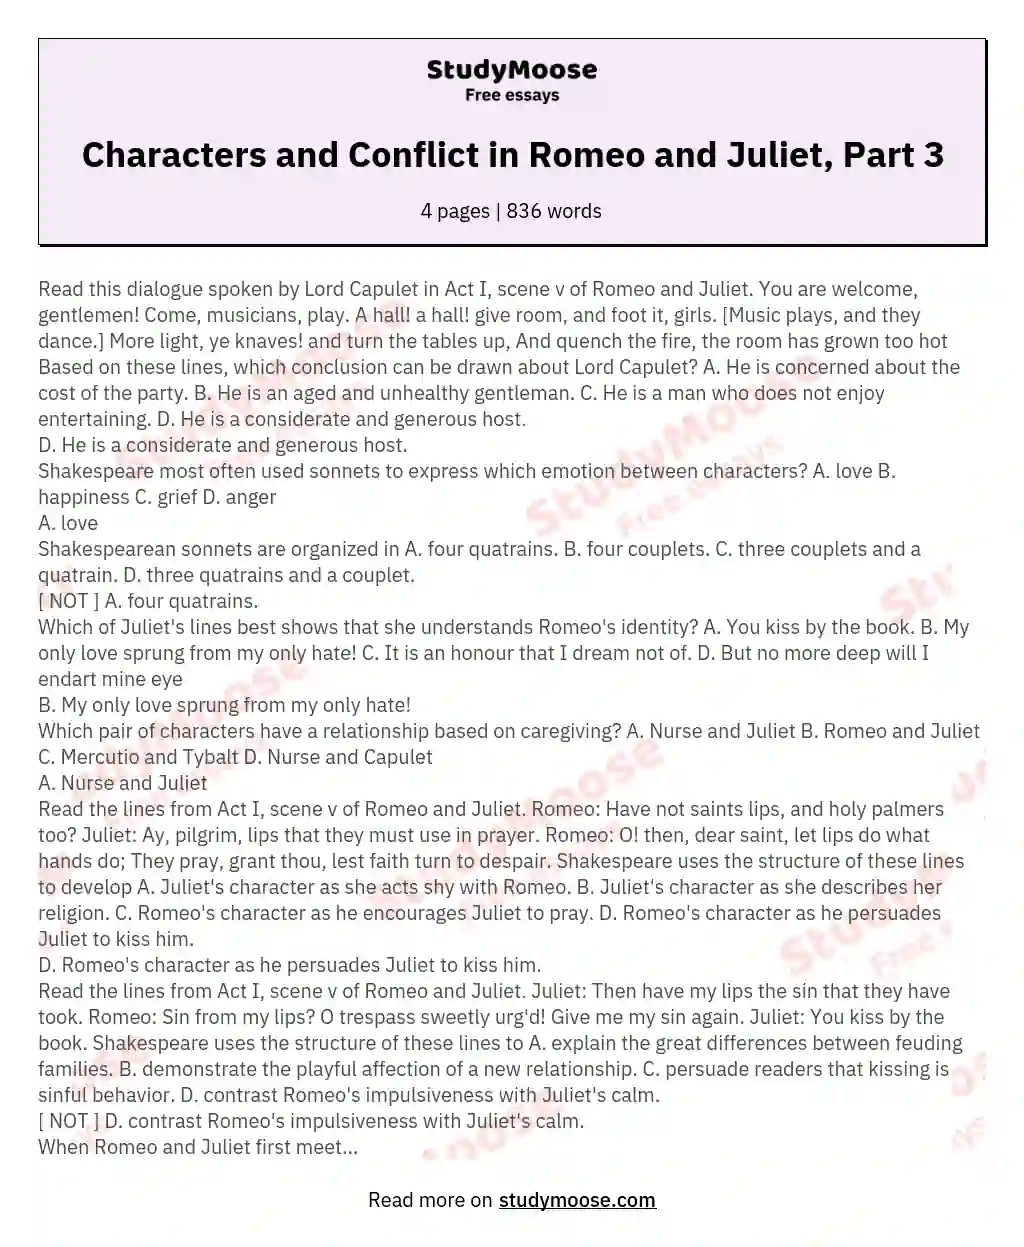 Characters and Conflict in Romeo and Juliet, Part 3 essay